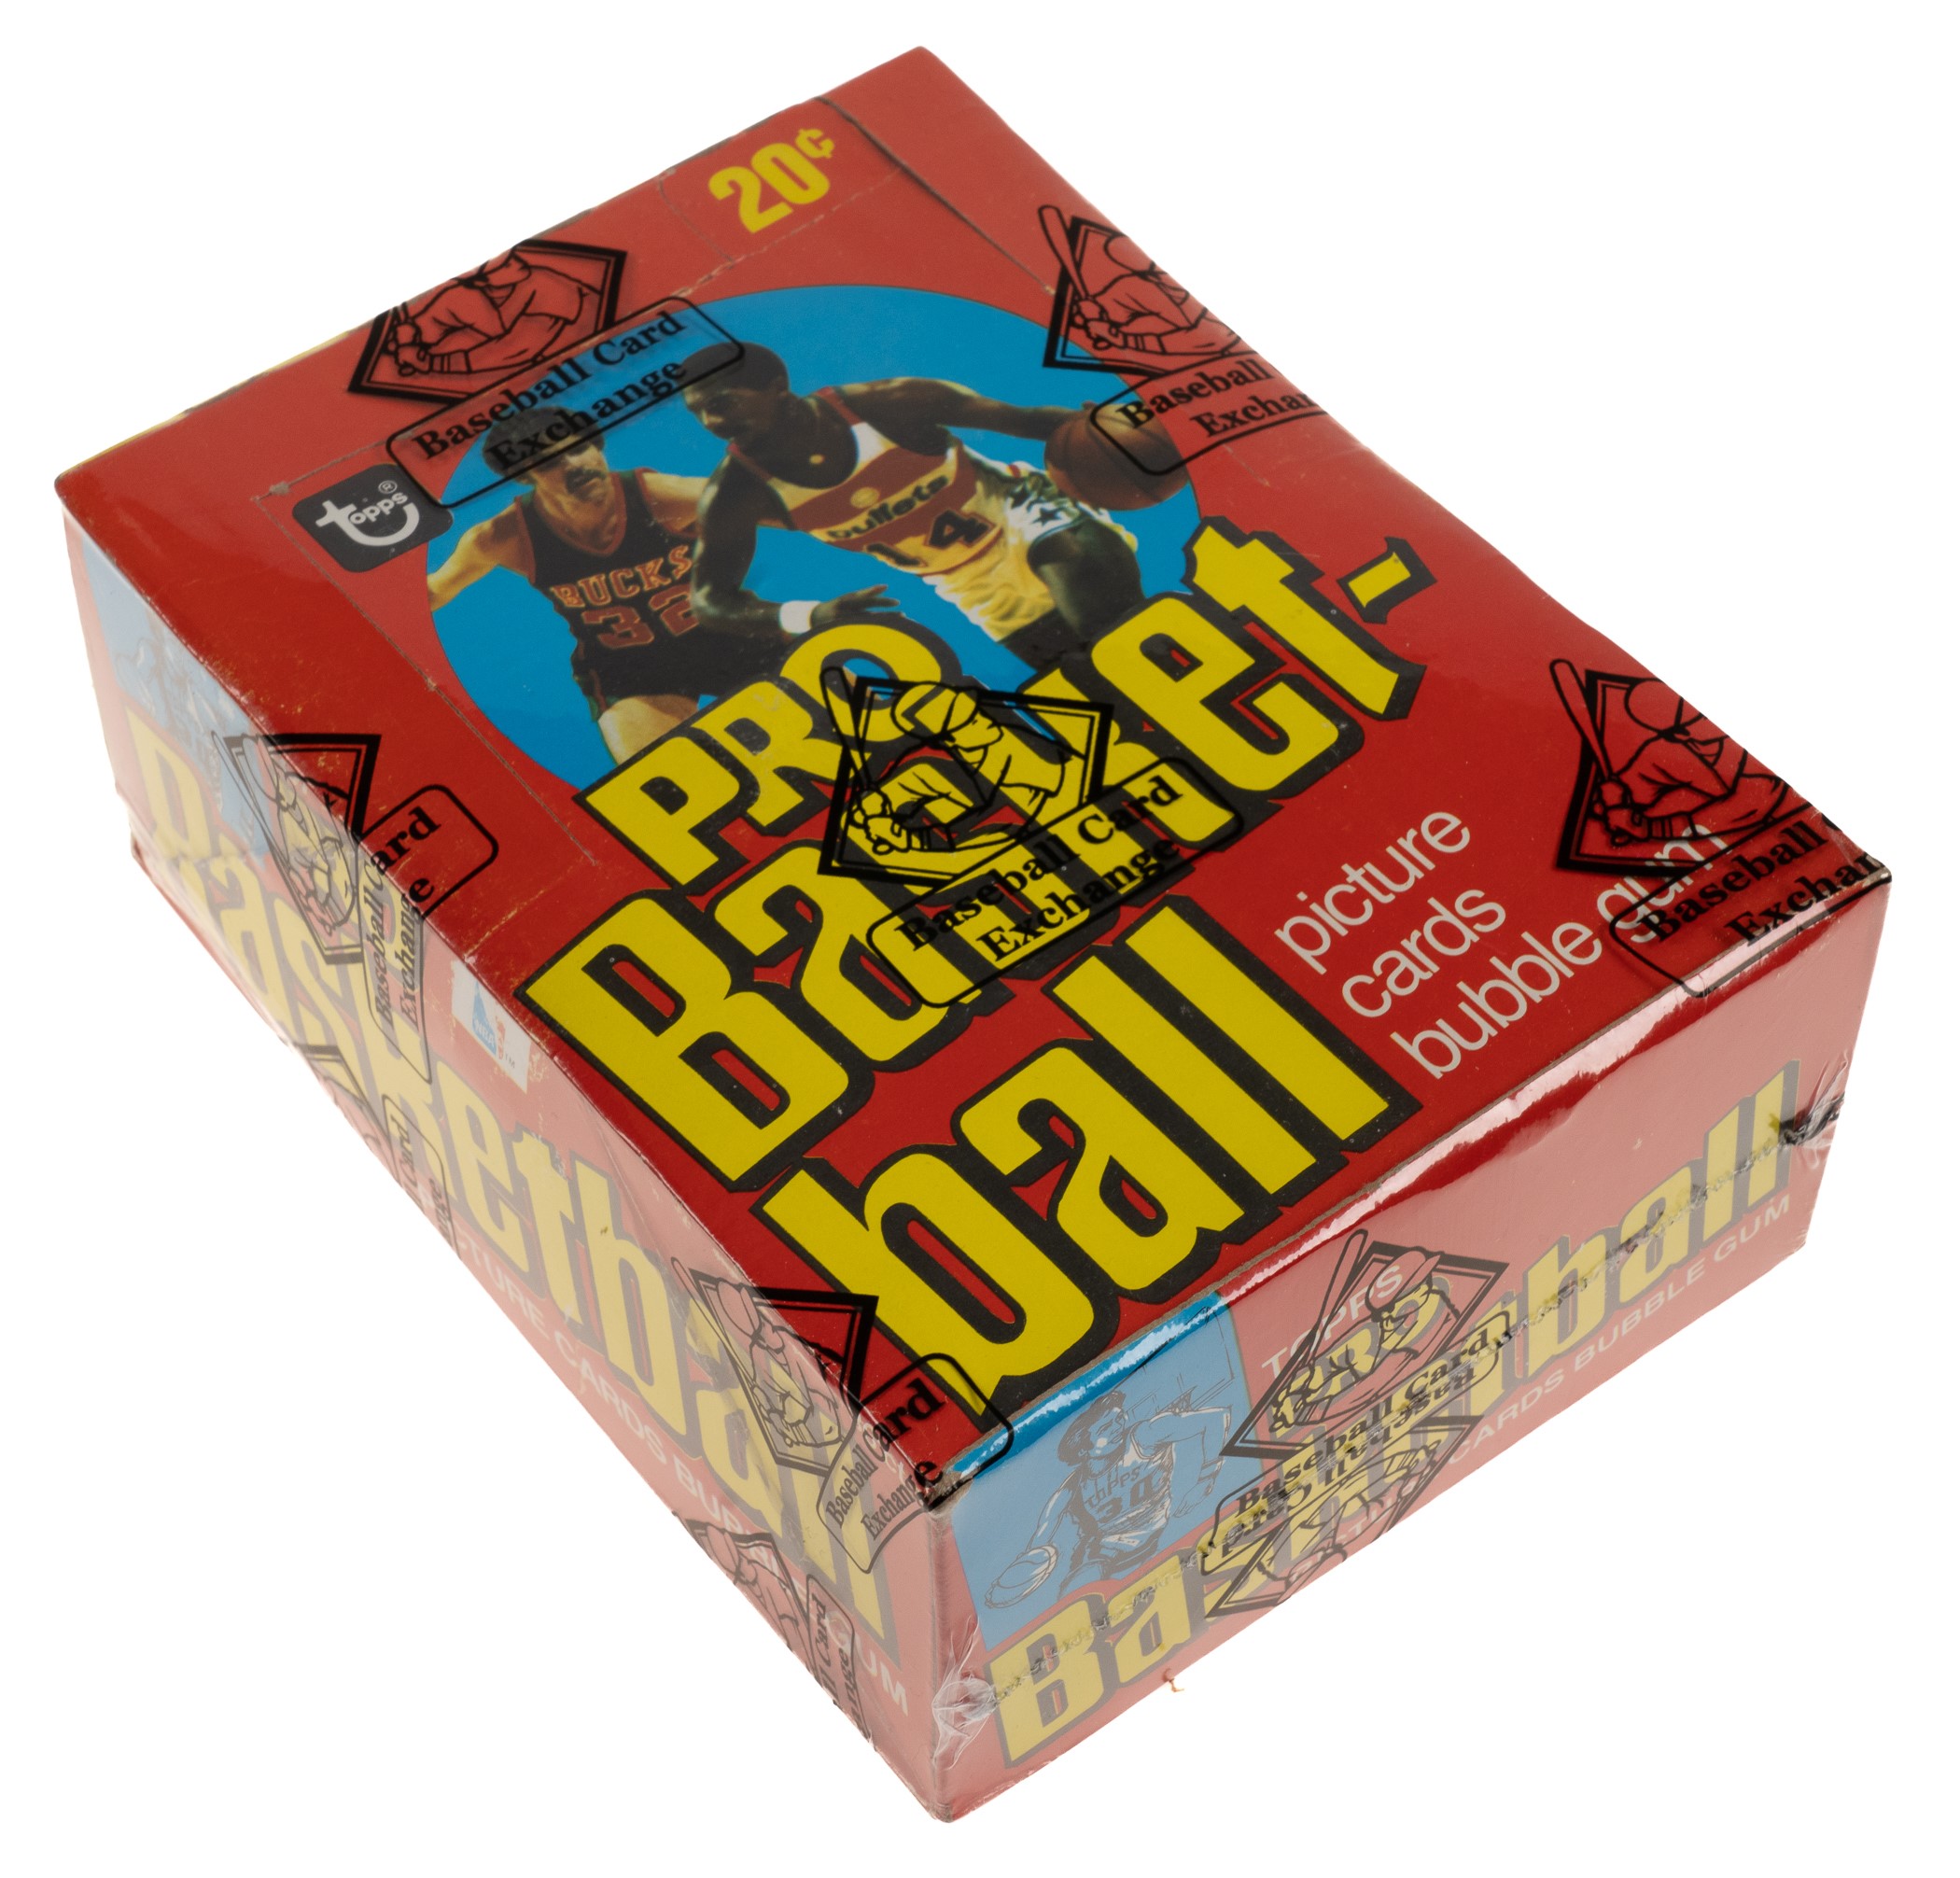 This 1978-1979 Topps Basketball Unopened Wax Box sold in REA's Spring 2023 Auction